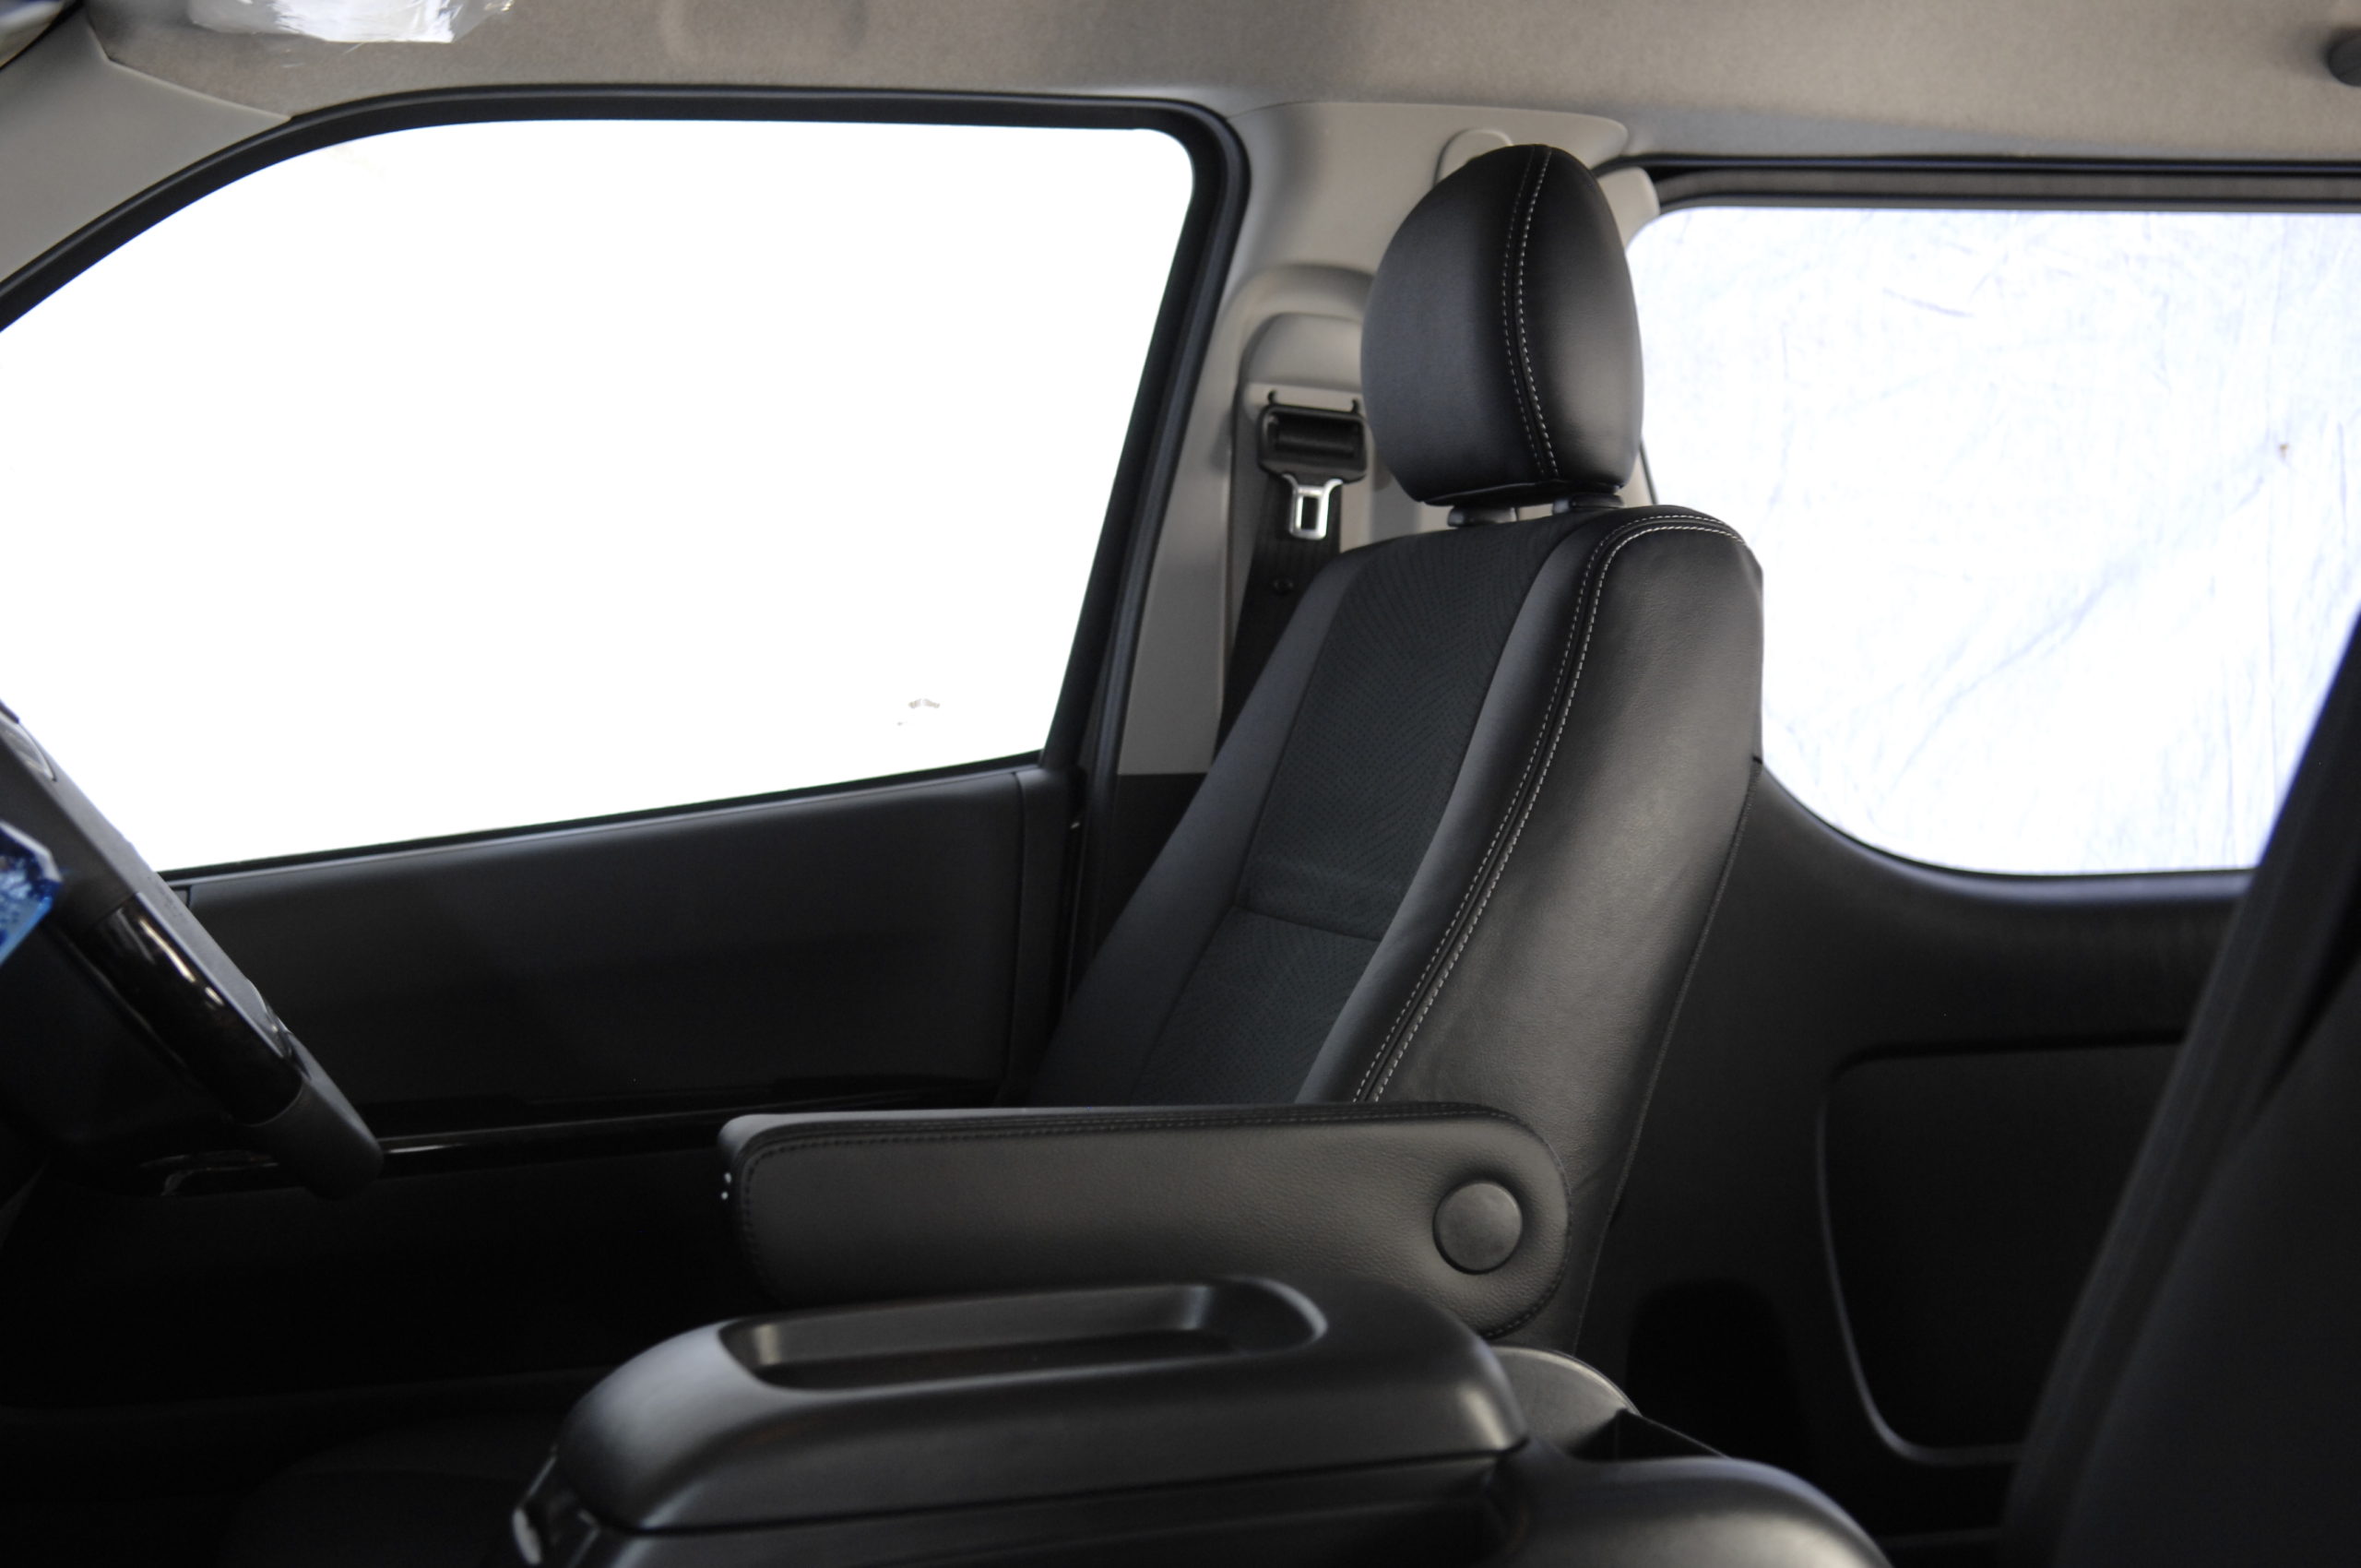 EXTRA ARMREST for HIACE ｜エクストラ アームレスト for ハイエース :: 株式会社BIG DIPPER